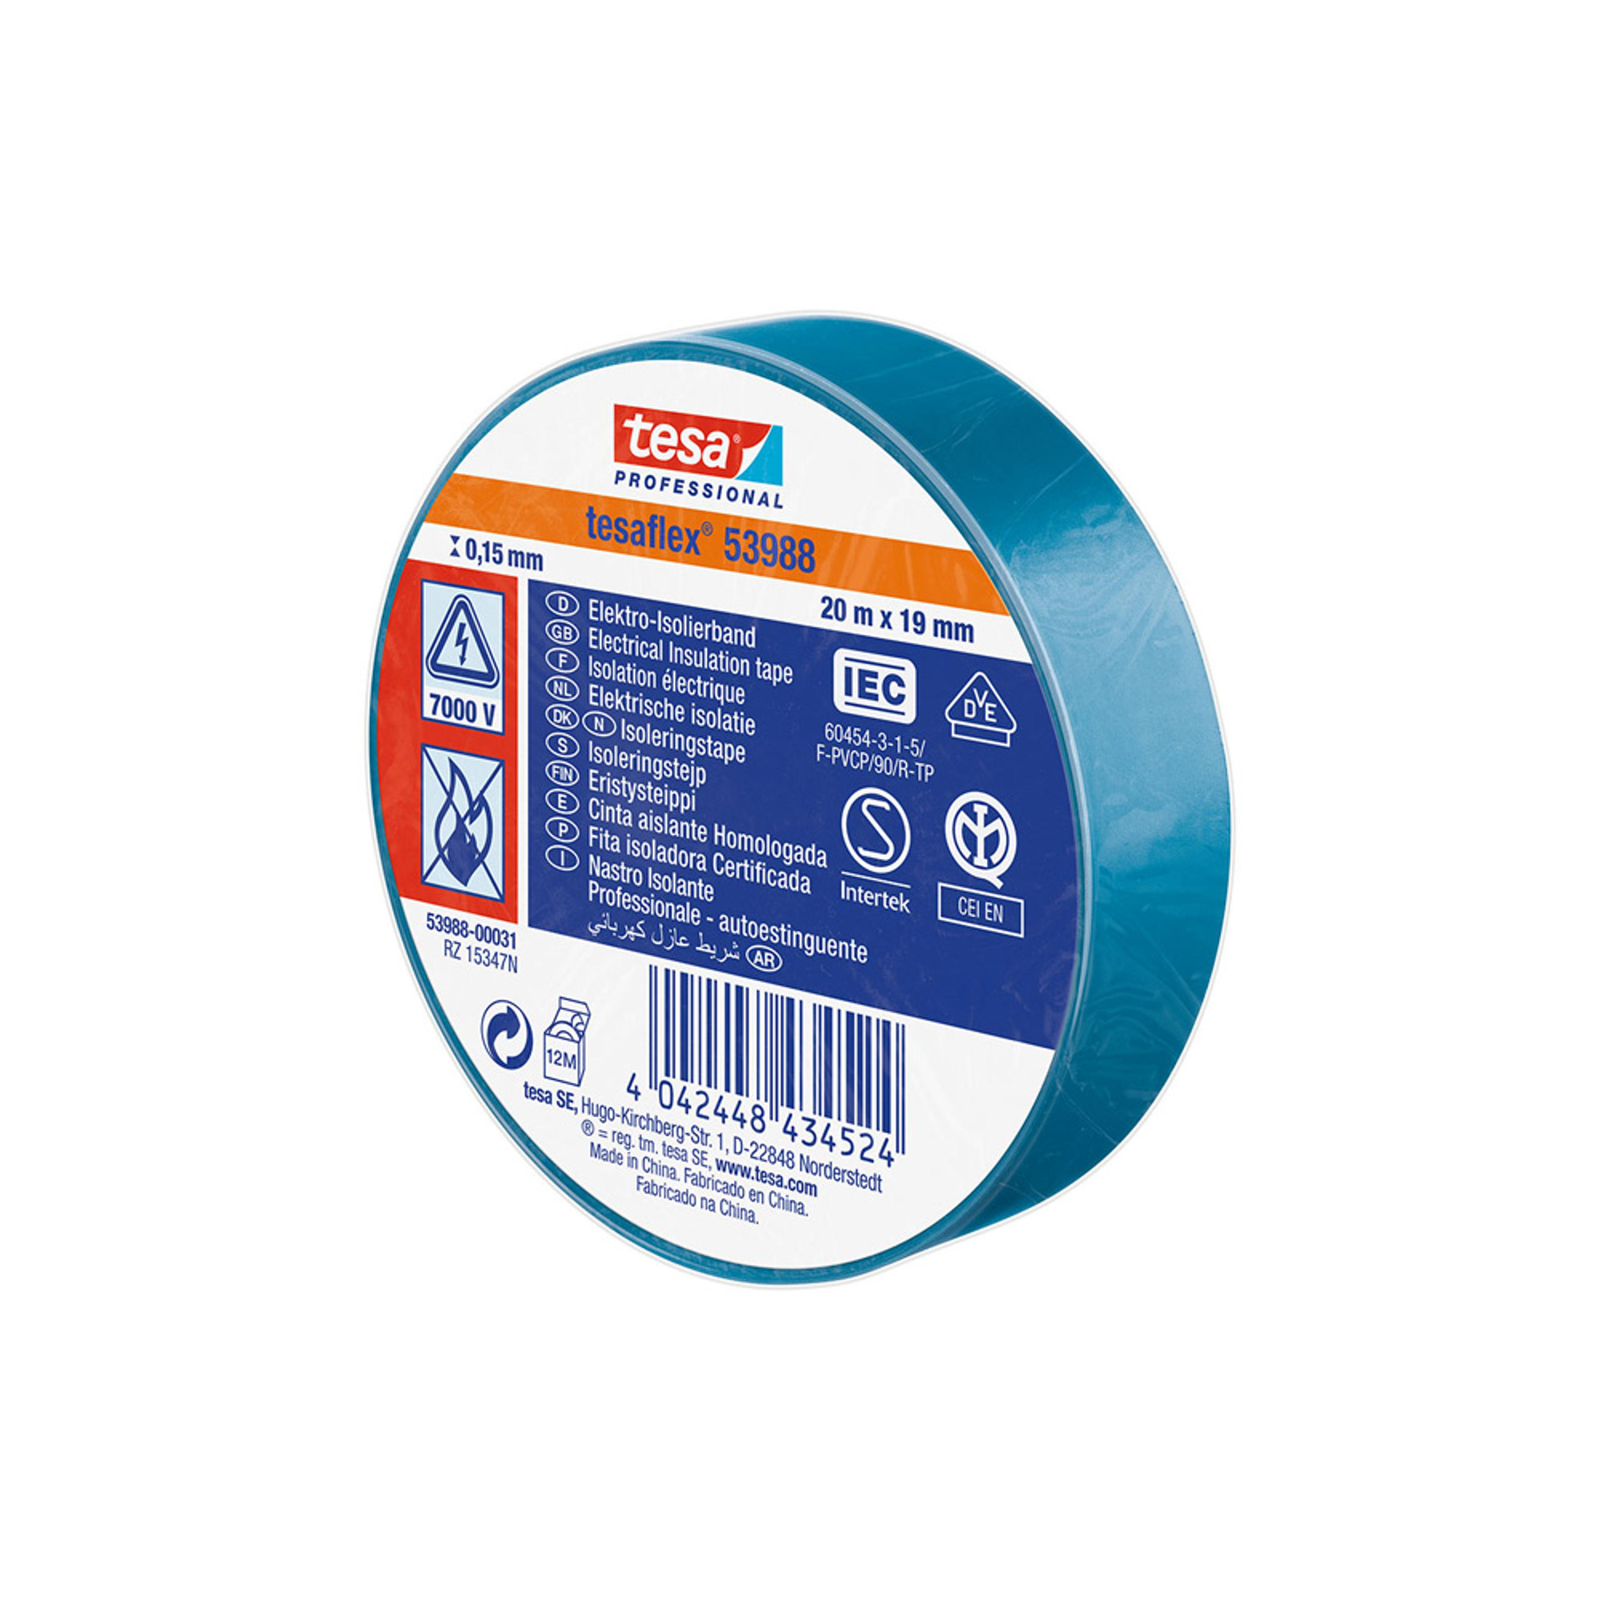 Approved insulating tape 20 mx 19 mm blue color TESA 53988-00031